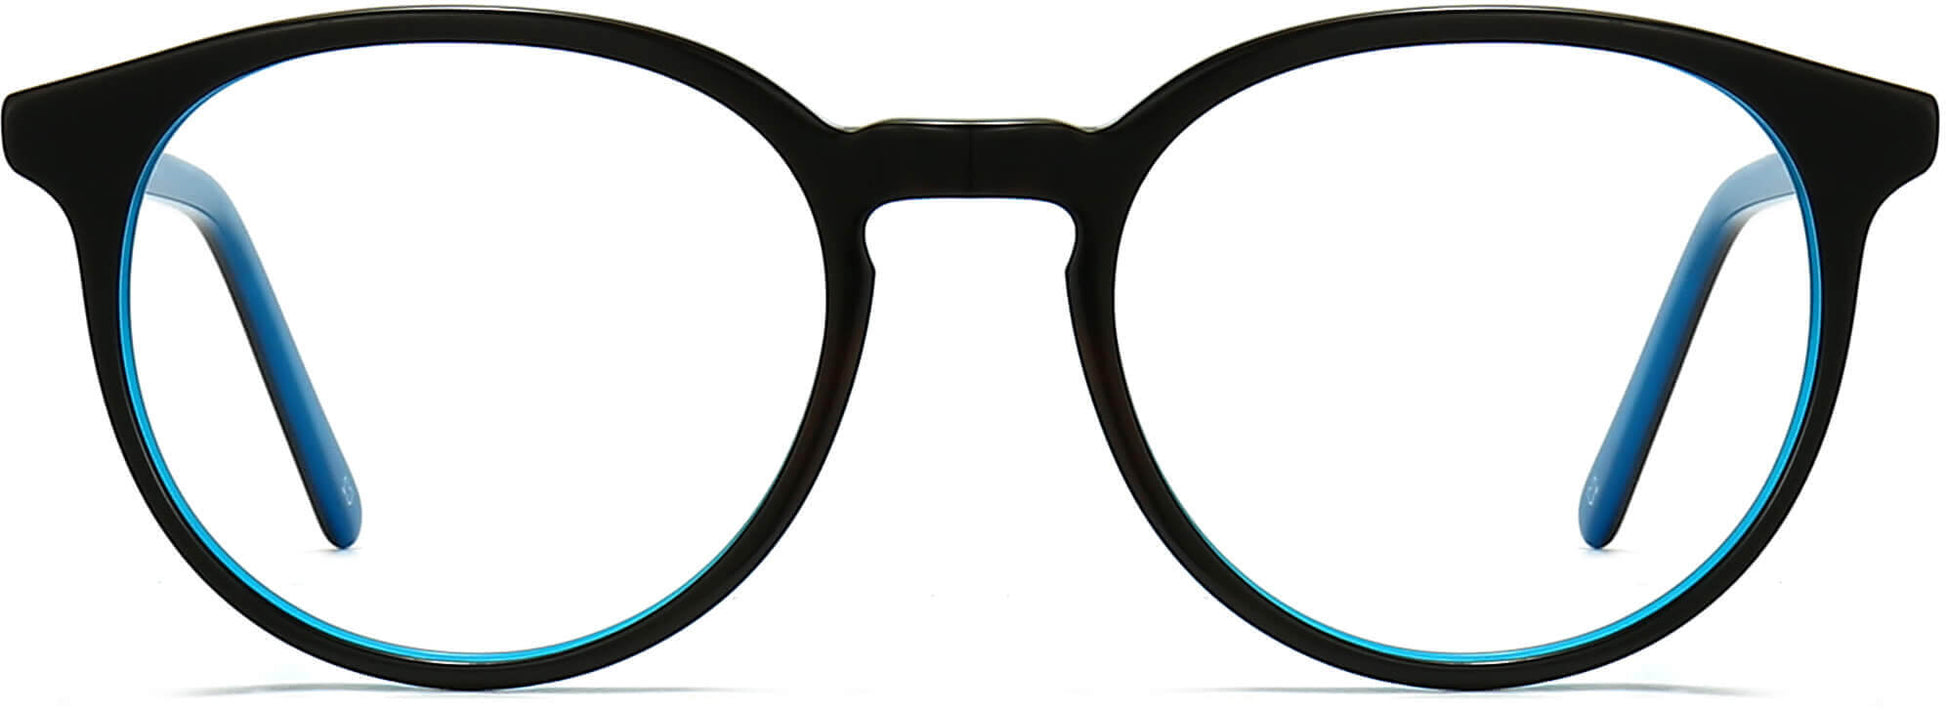 Fiona Round Black Eyeglasses from ANRRI, front view